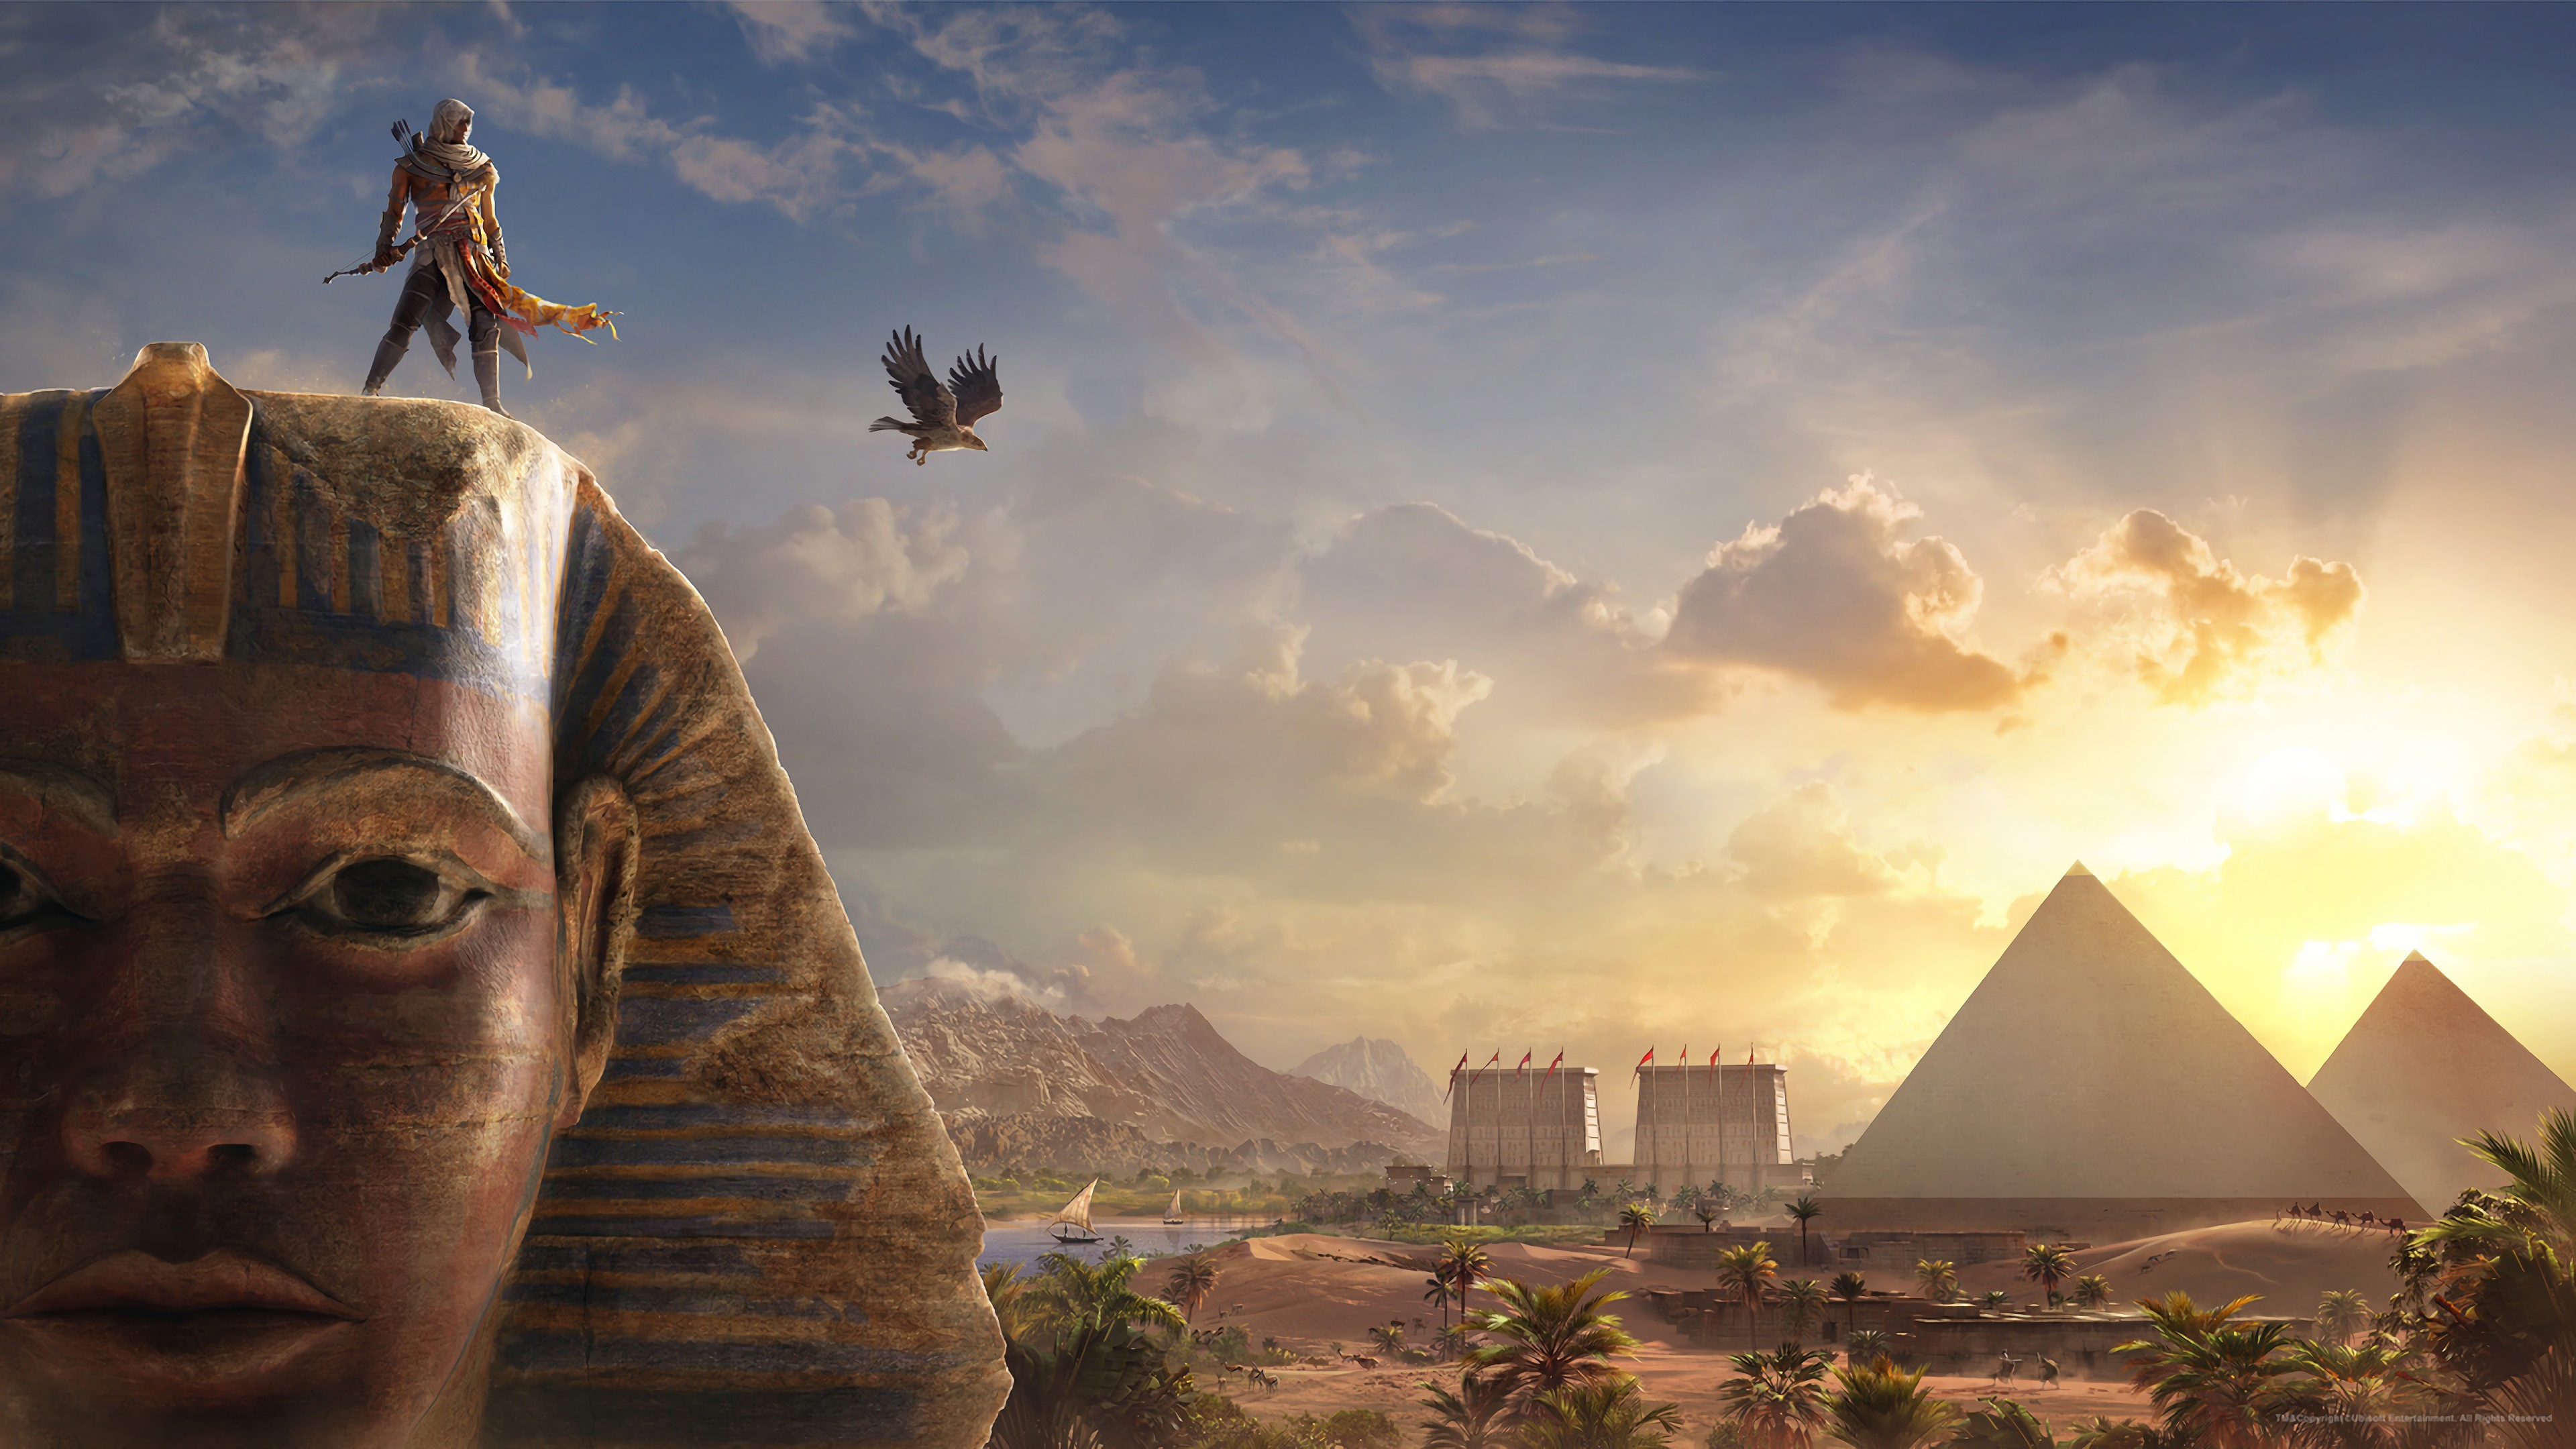 General 3840x2160 video games Assassin's Creed Egyptian mythology Assassin's Creed: Origins Bayek video game characters Ubisoft Pyramids of Giza landmark